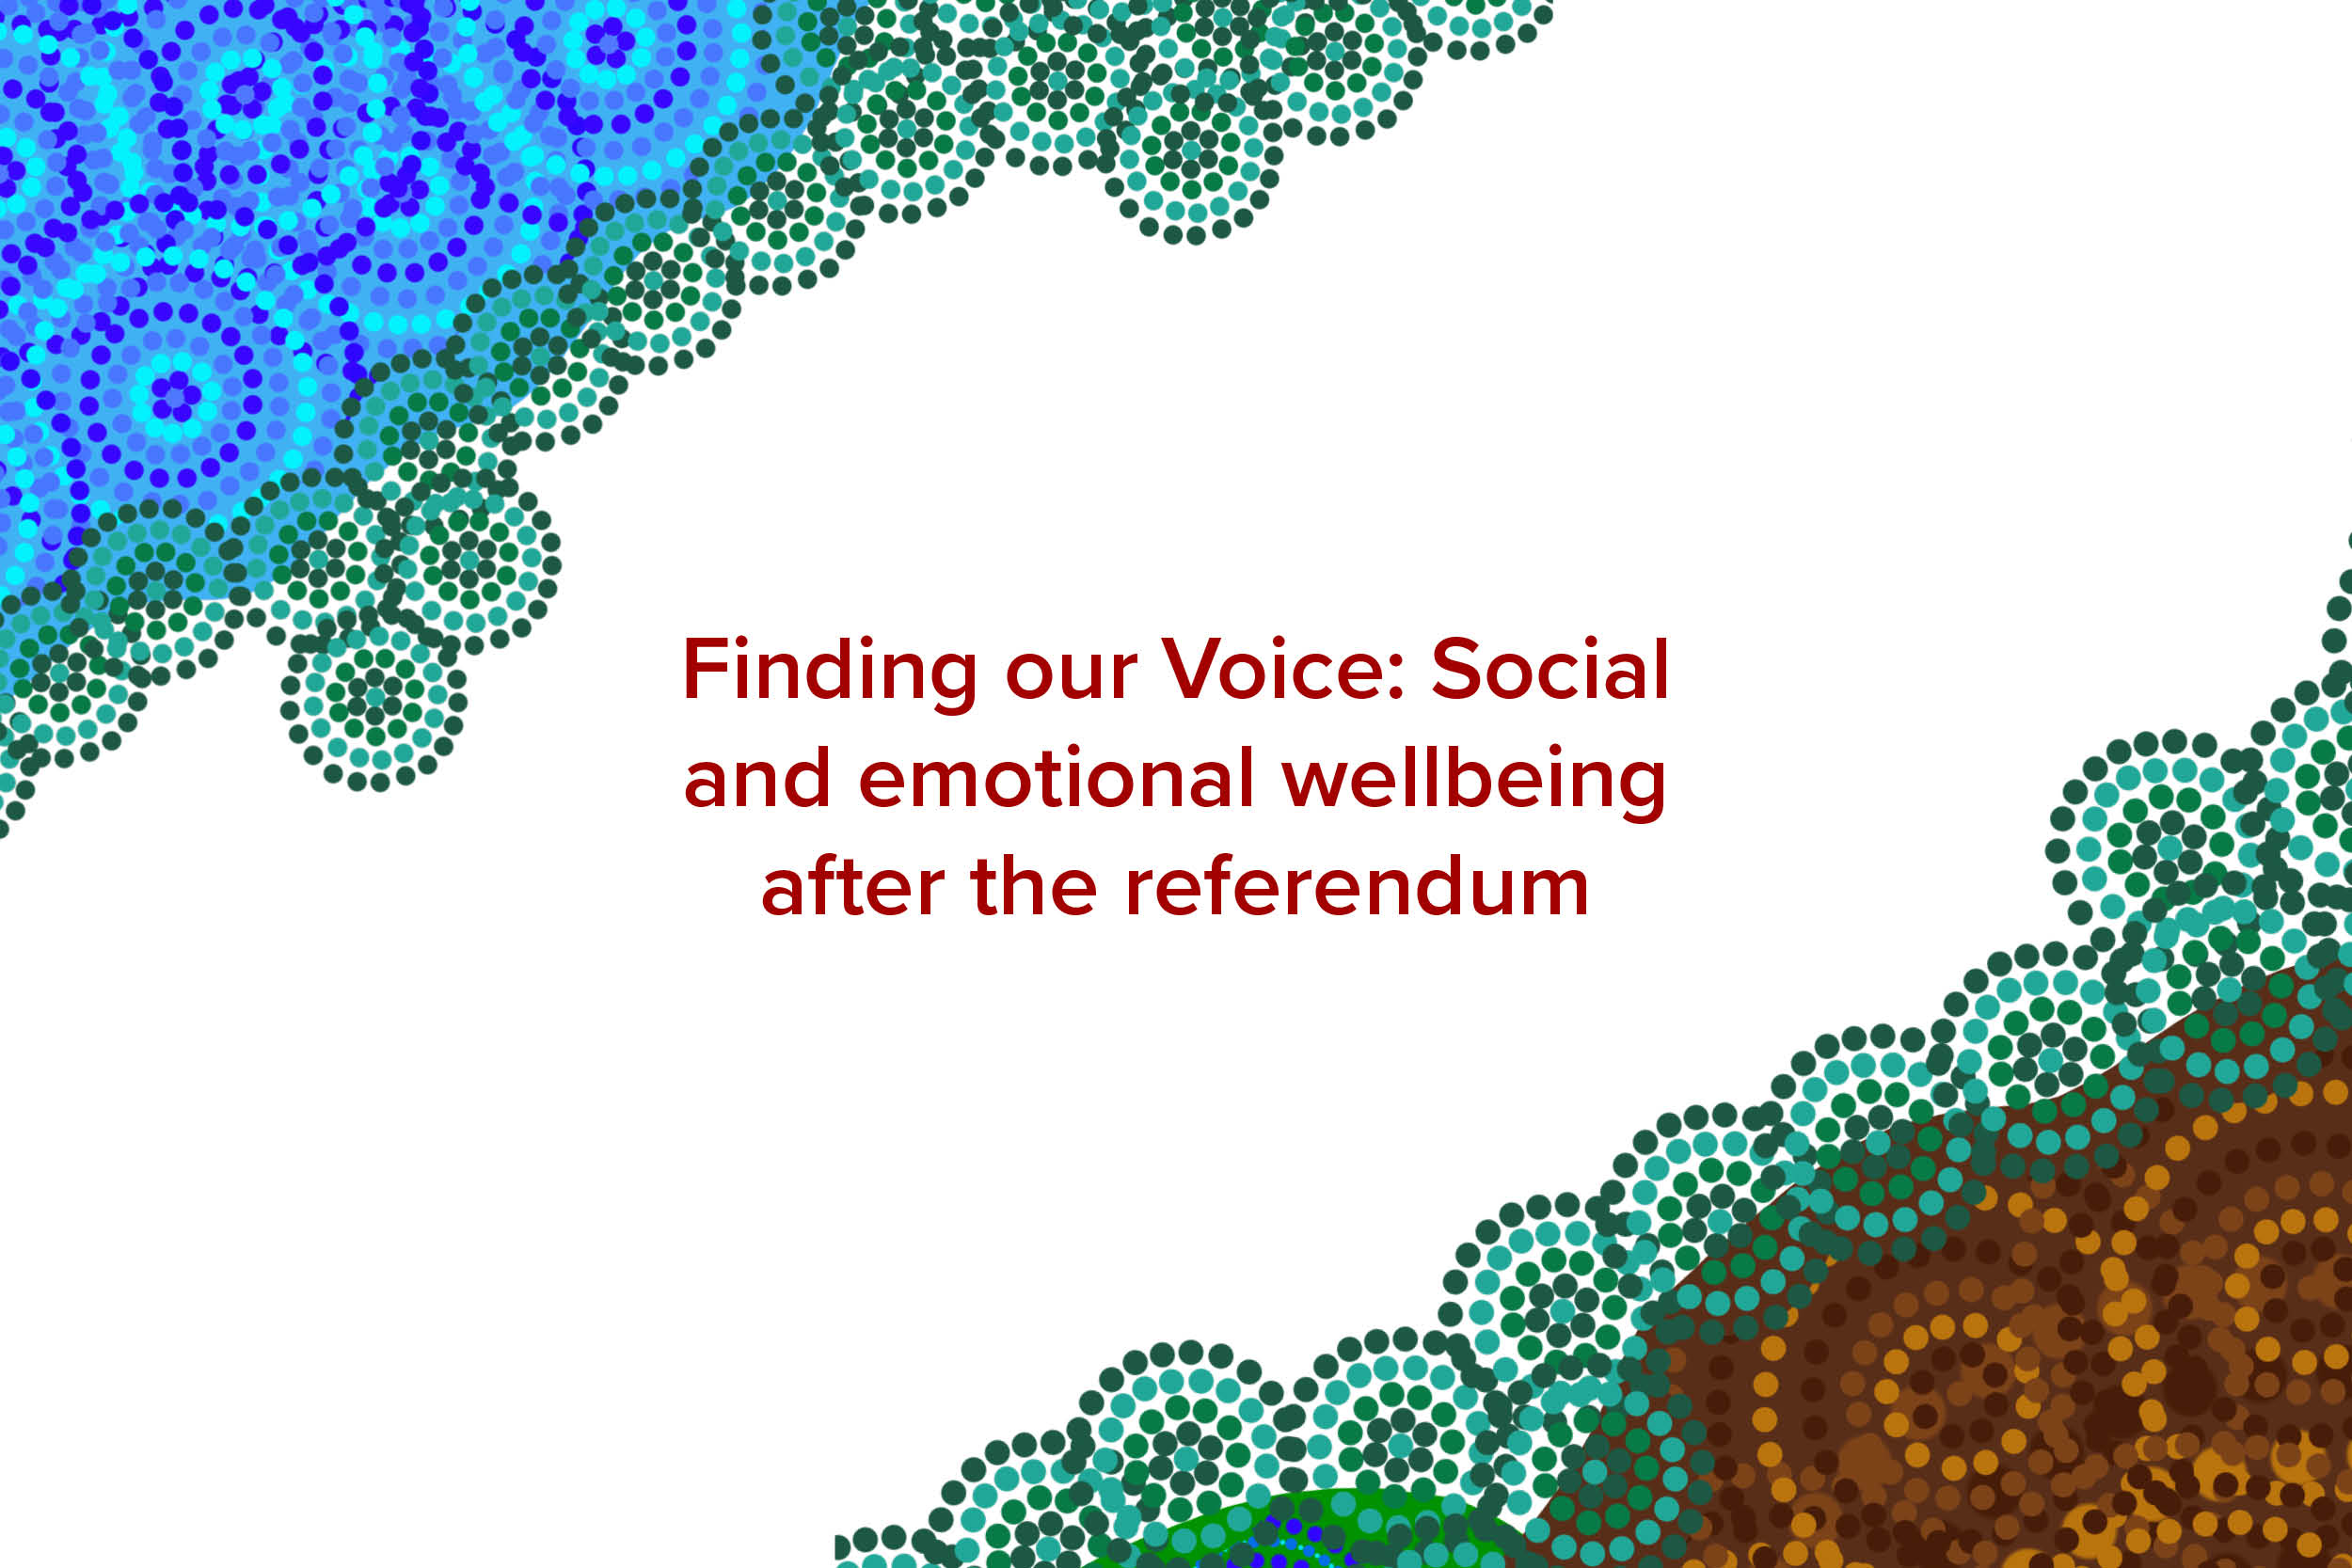 Finding our Voice: Social and emotional wellbeing after the referendum